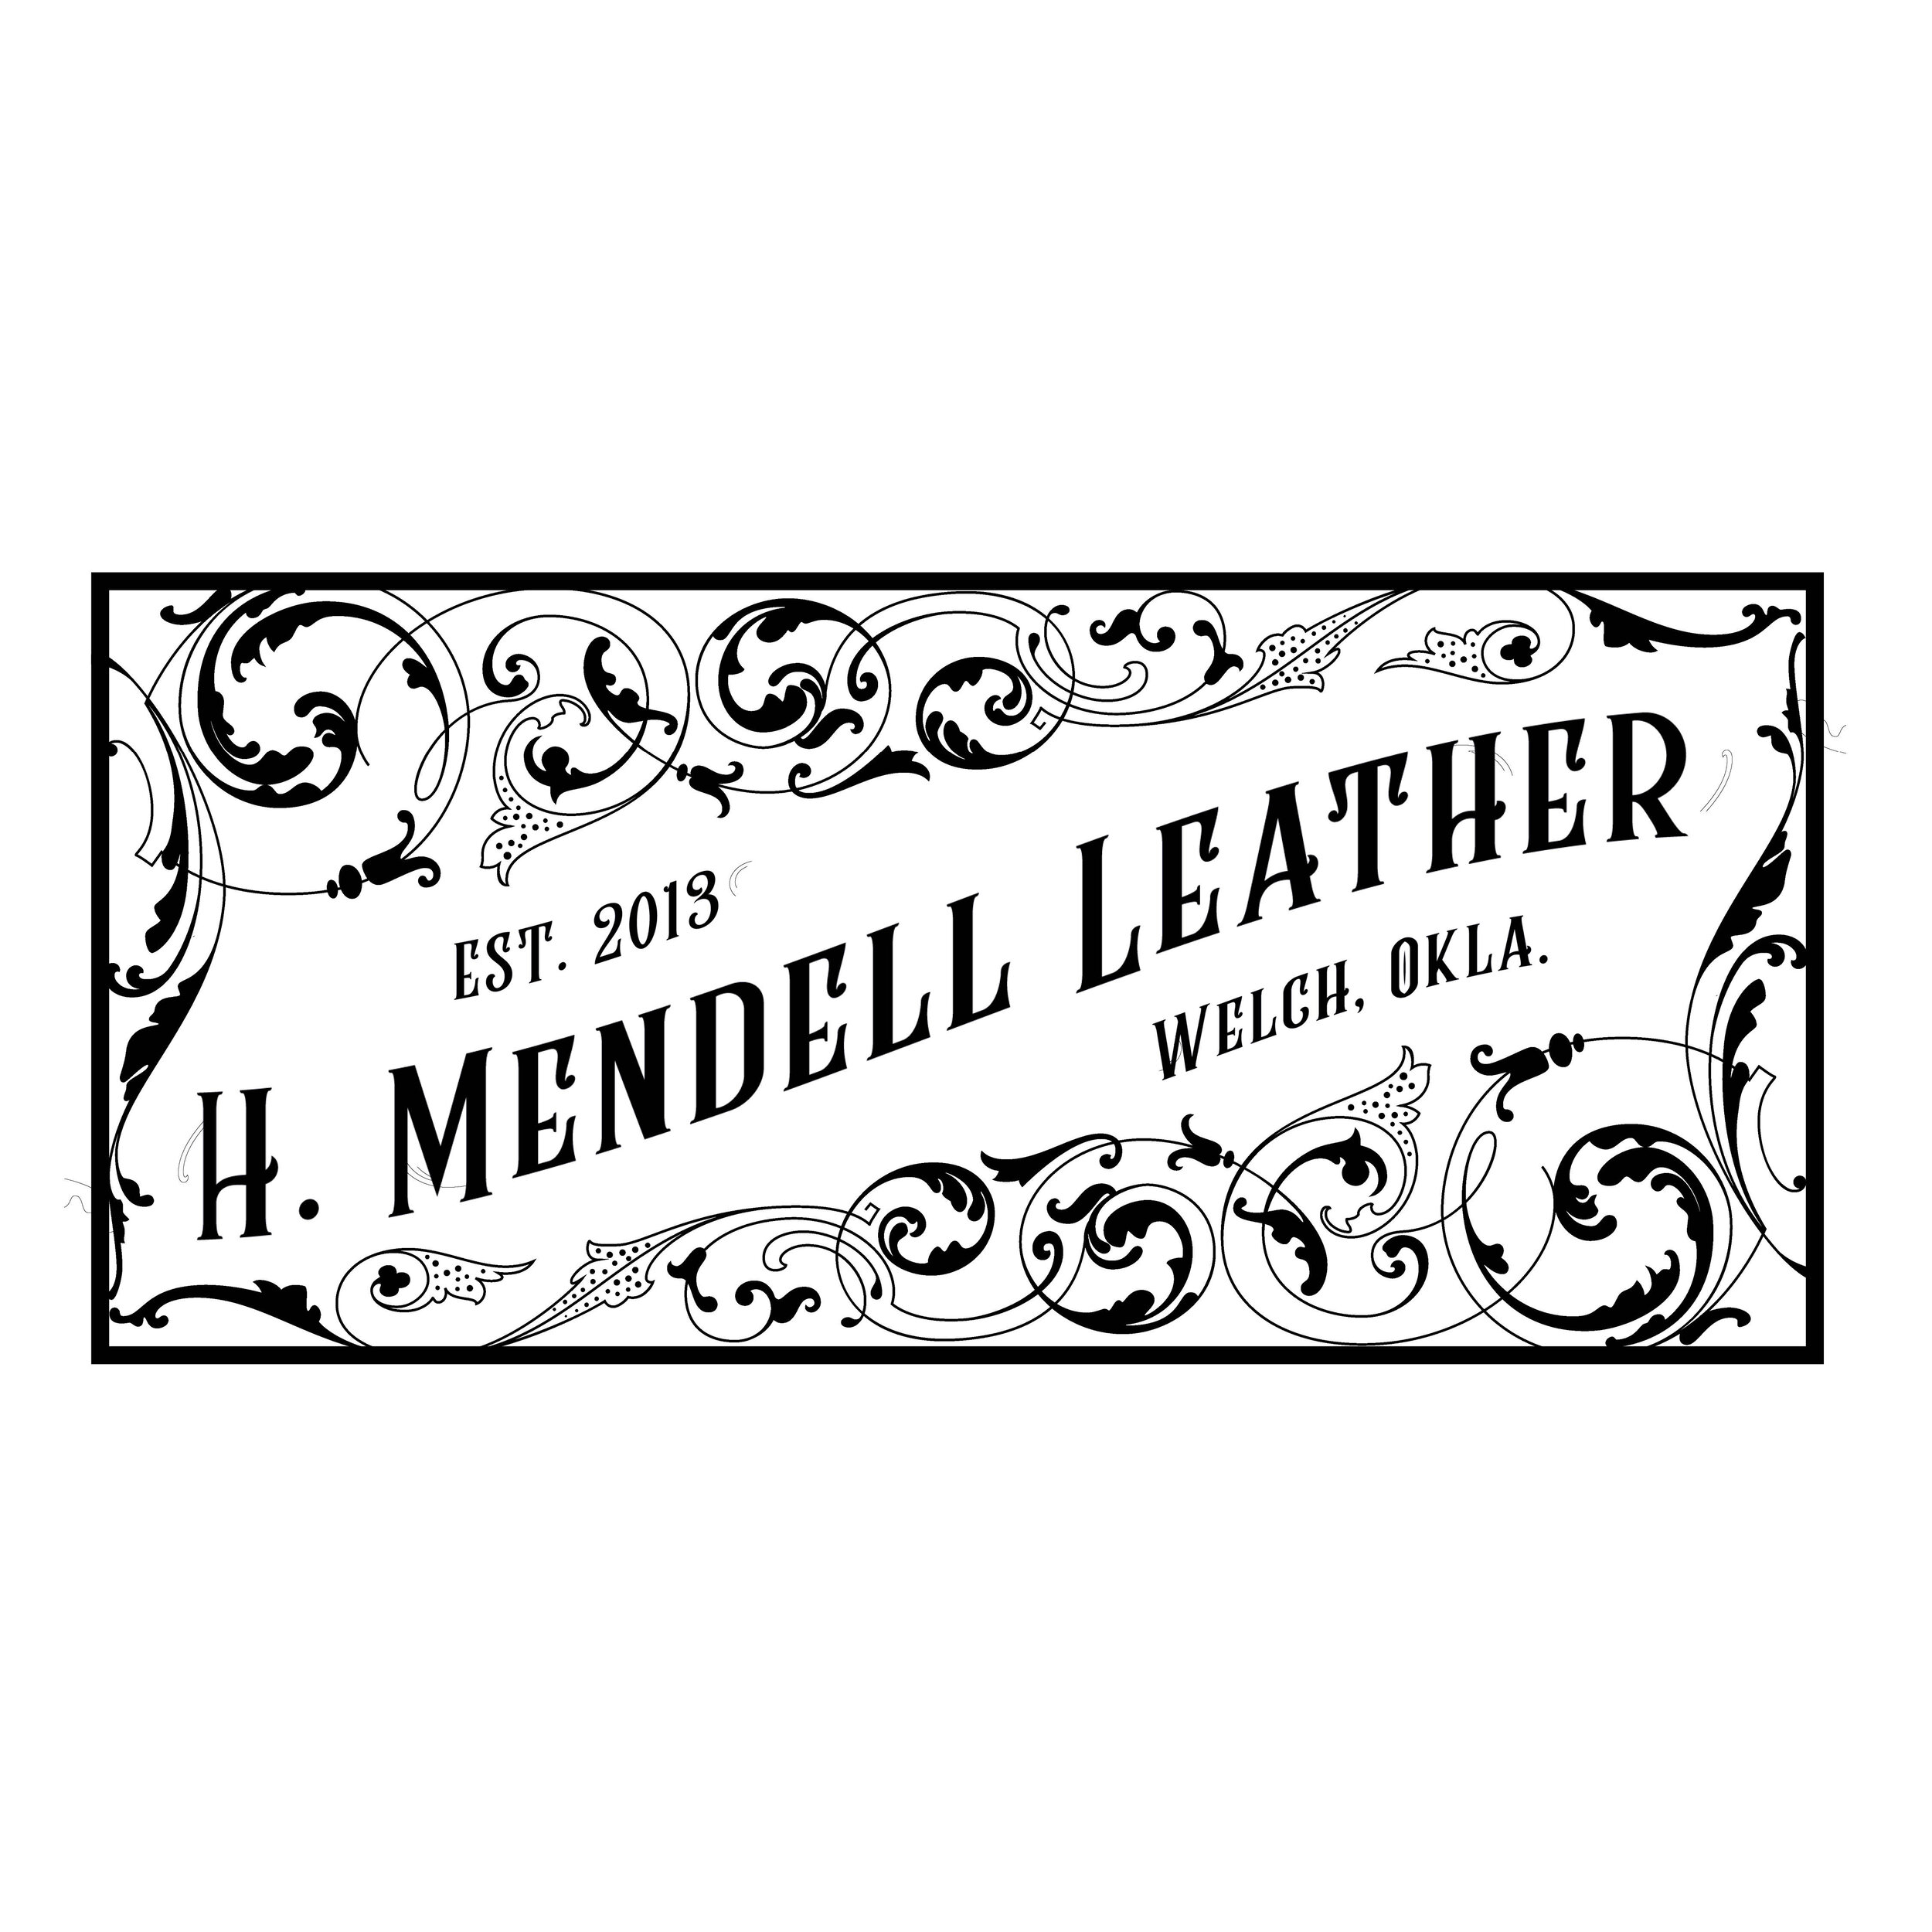 H. Mendell Leather Final Logo low res.jpg